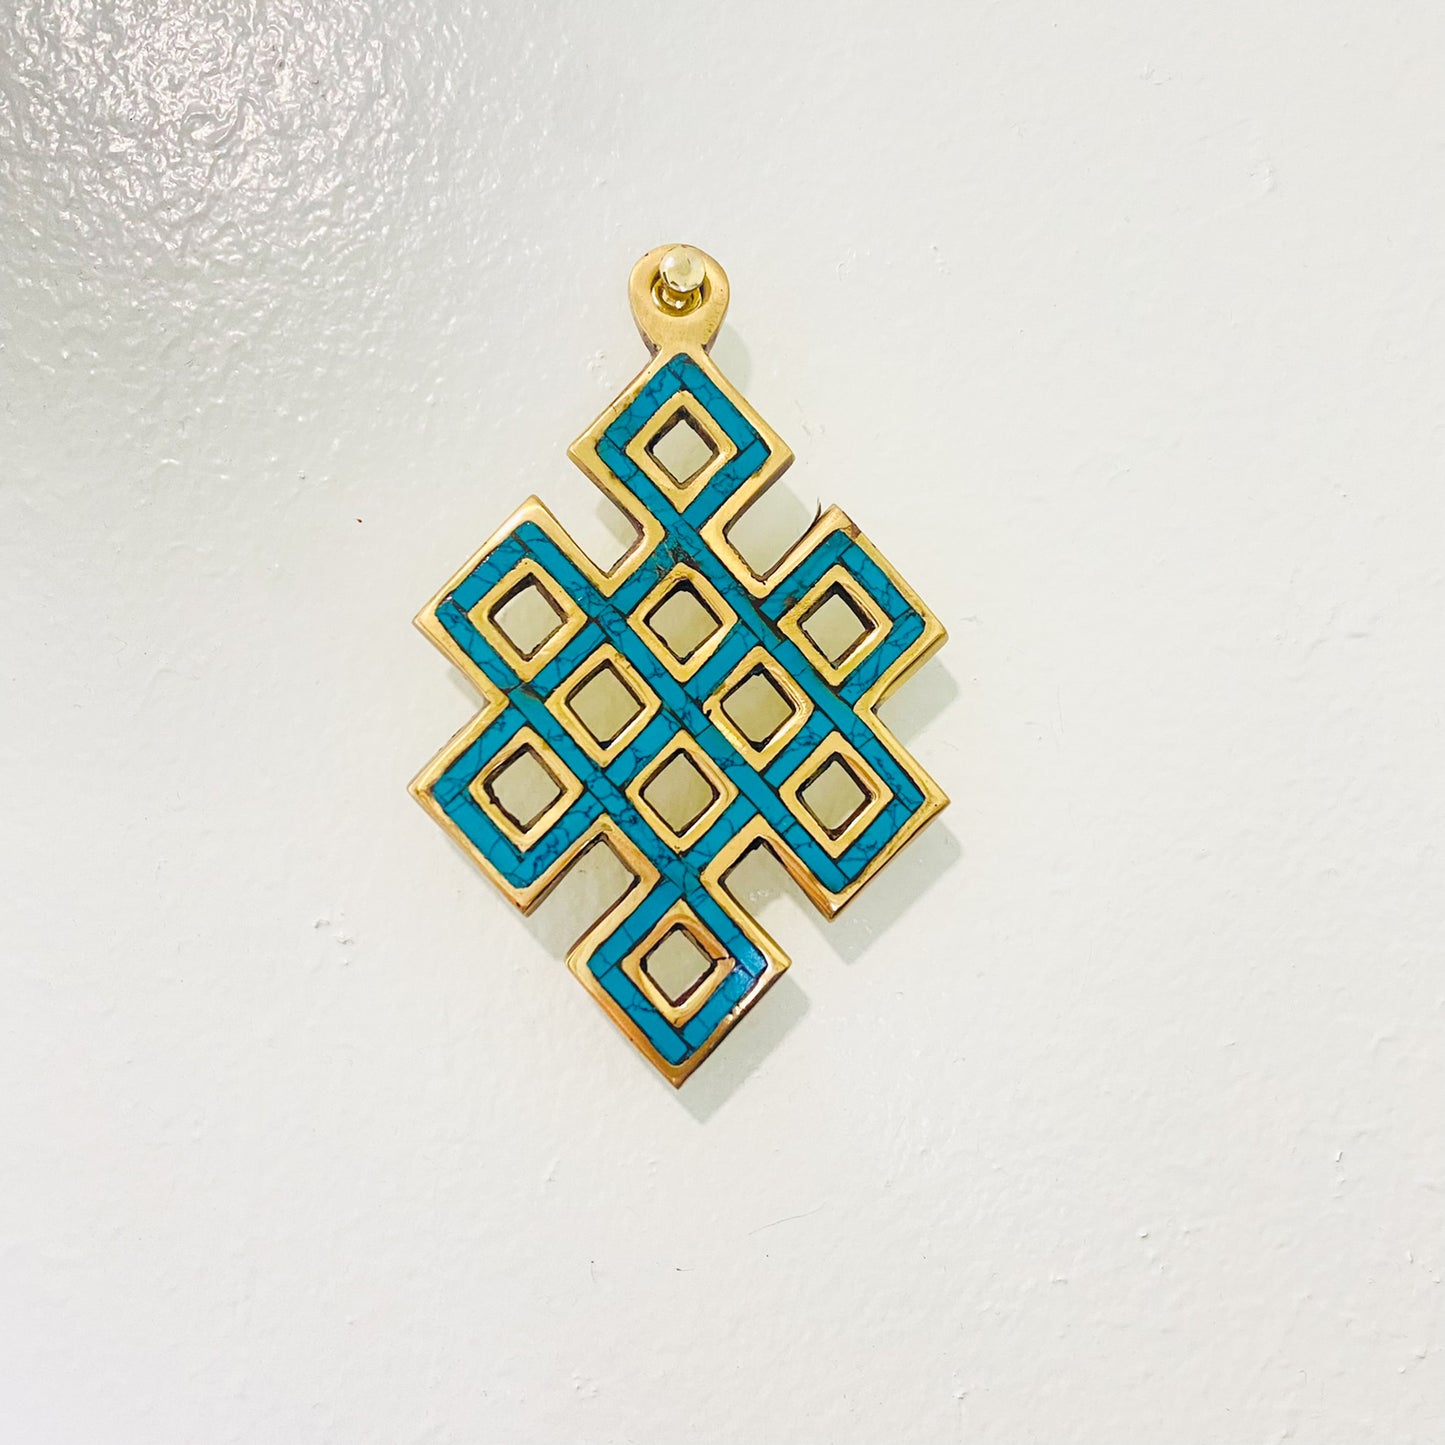 Metal Infinity Hanging, Turquoise Endless Knot Wall Decor, Minimalistic Home Decor, Handmade Wall Hanging, Brass Wall Decor, Good Luck Gifts